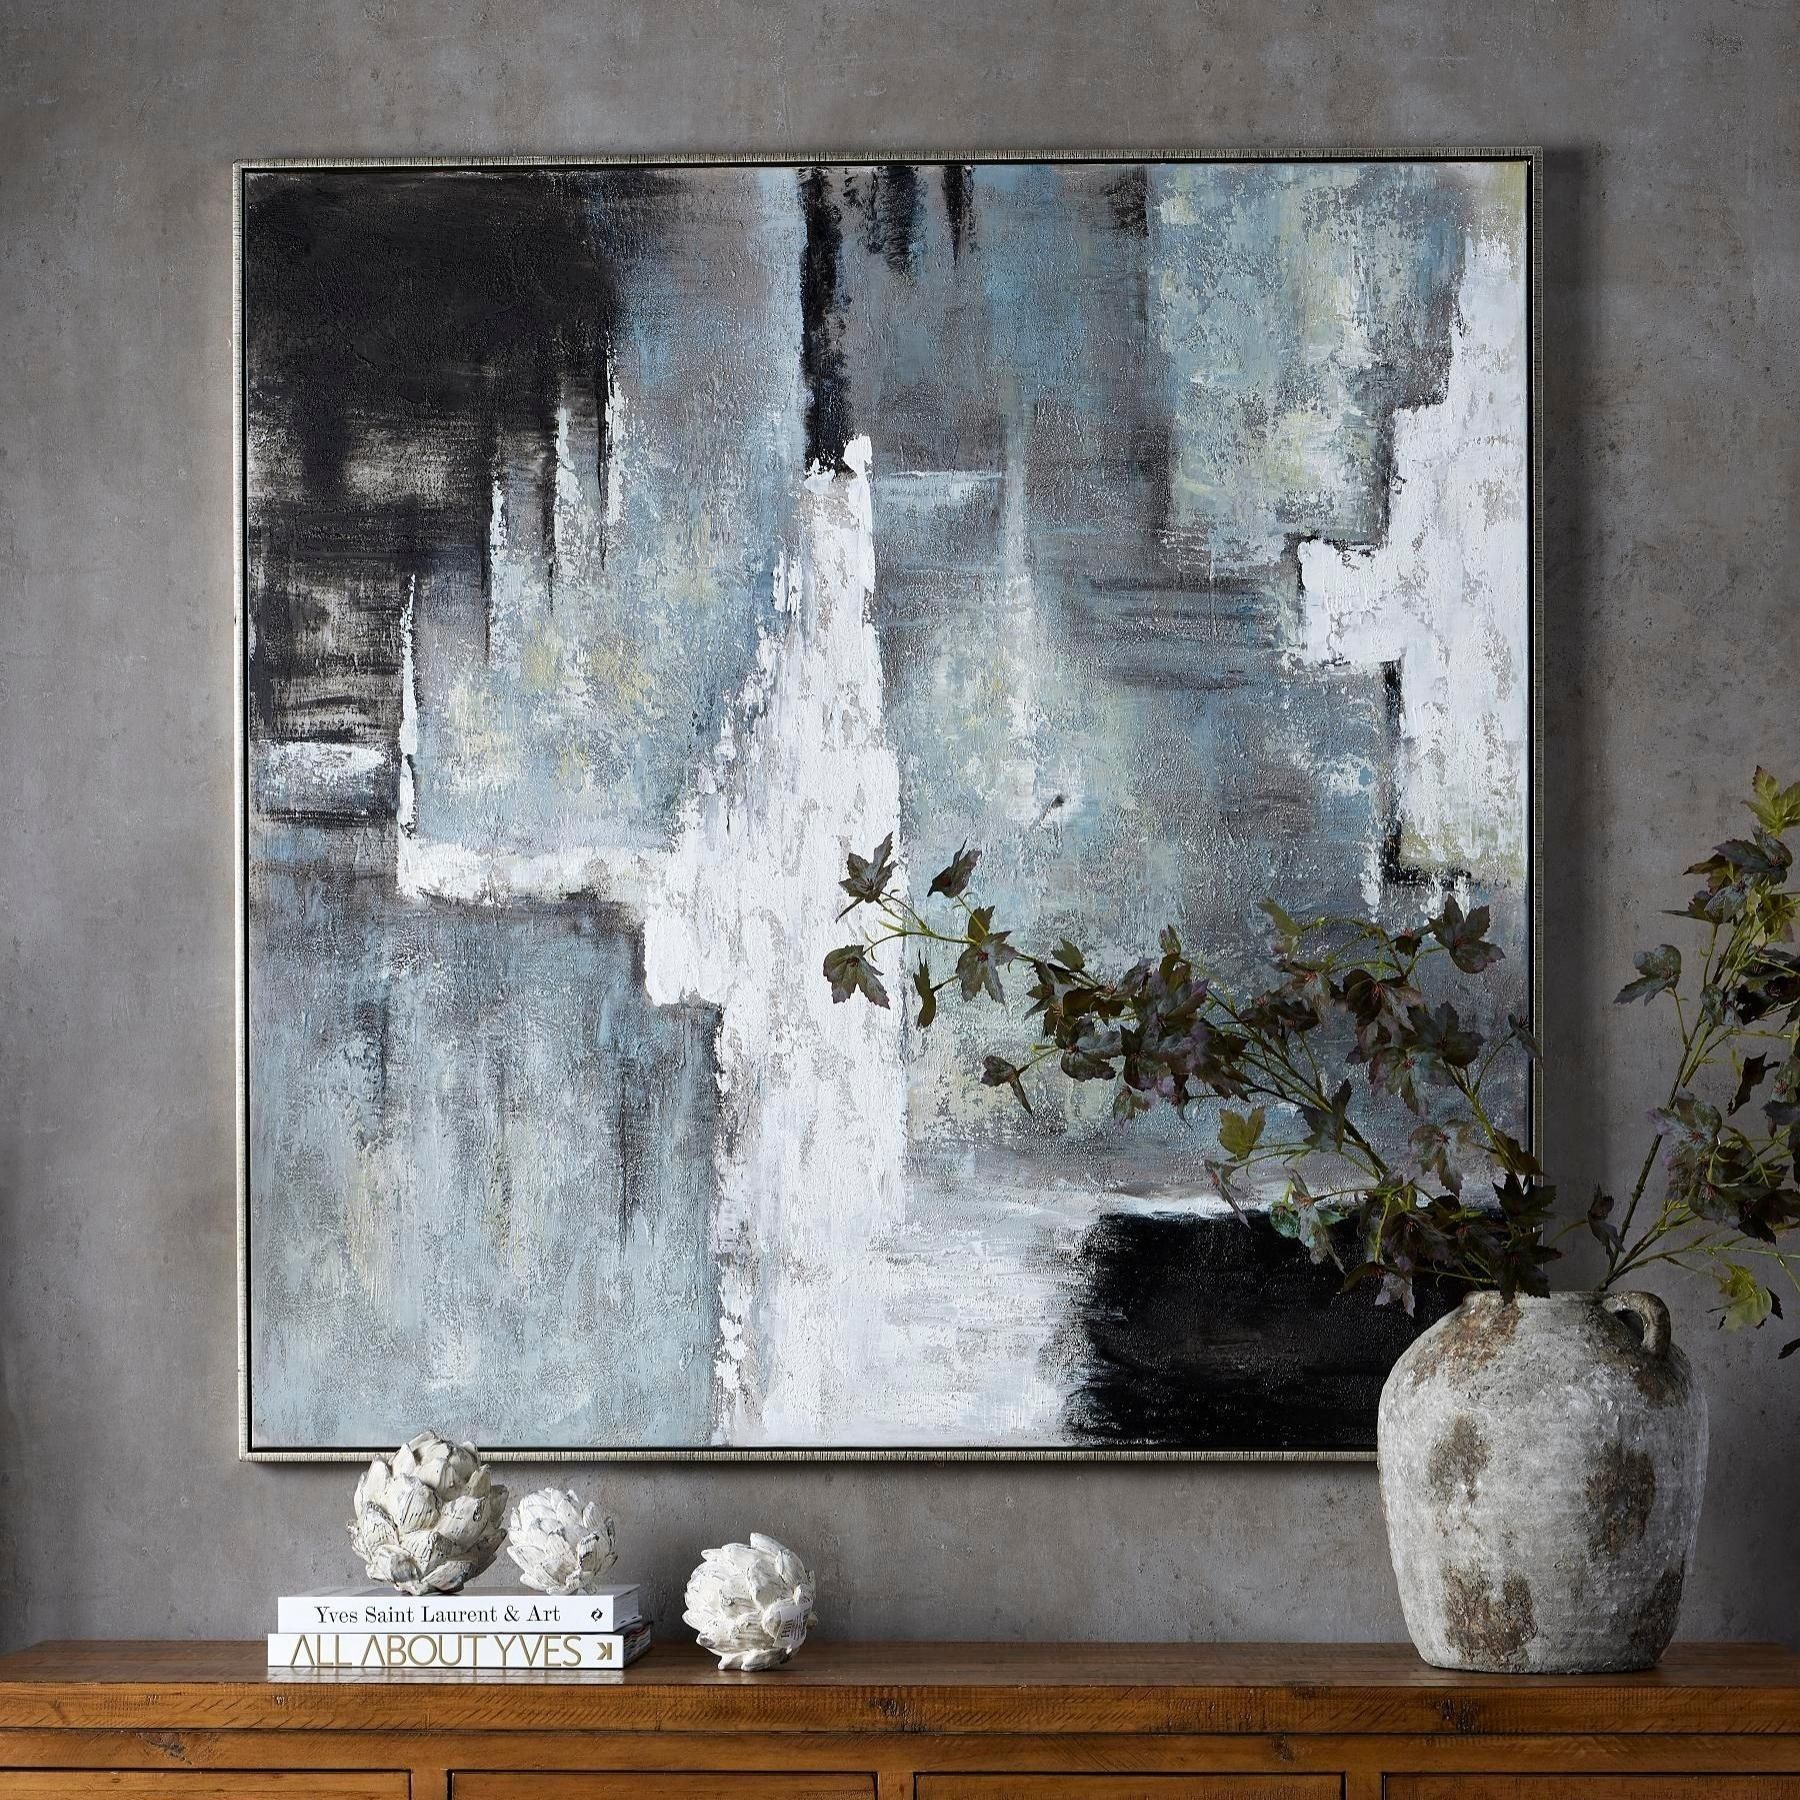 Hand Painted Black And White Layered Abstract Painting - Image 5